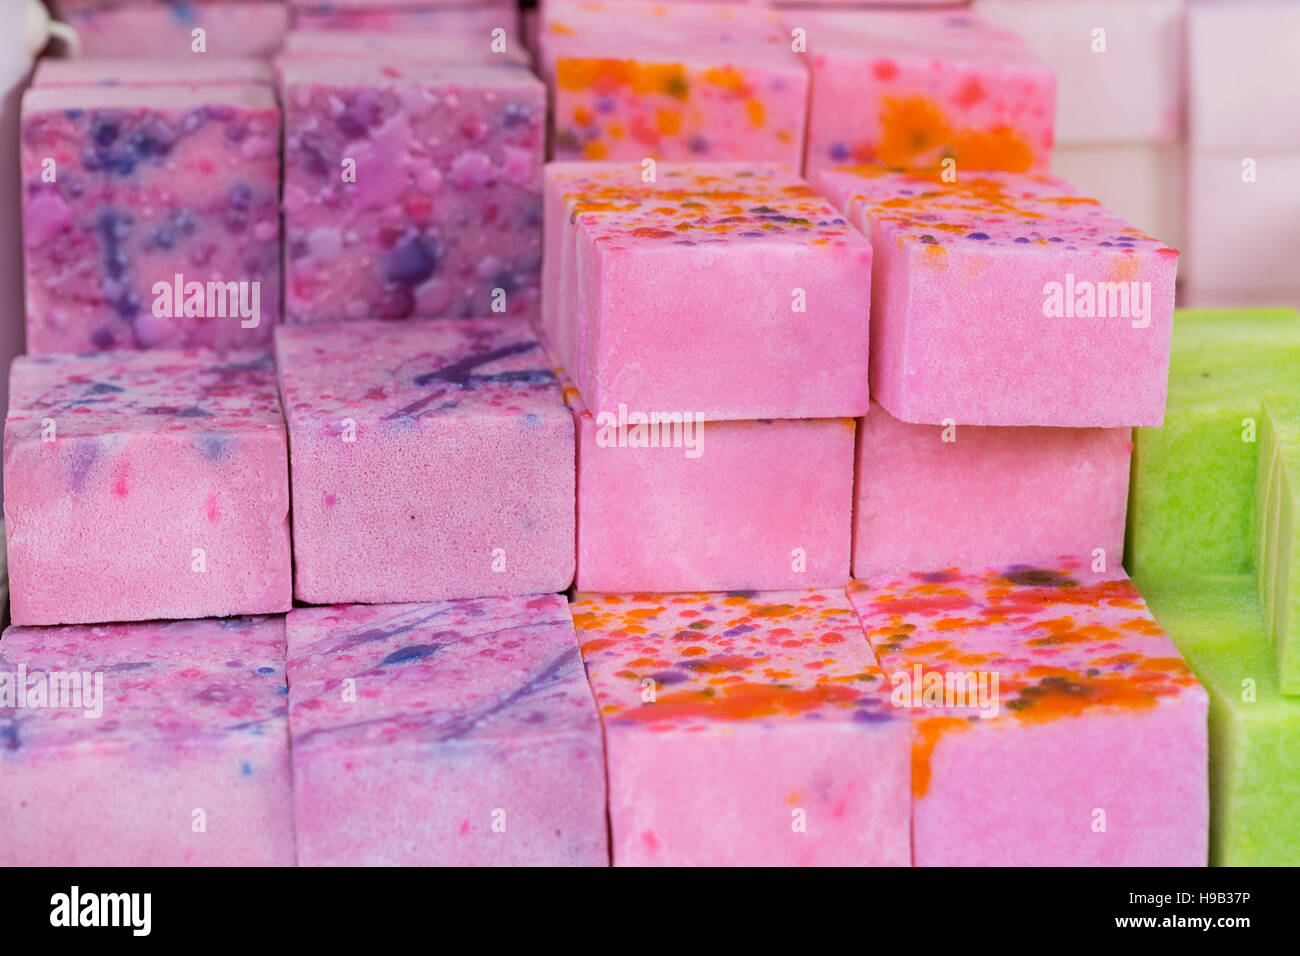 Colorful pink, purple and lime green marbled blocks of handmade soap on stall at craft market Stock Photo